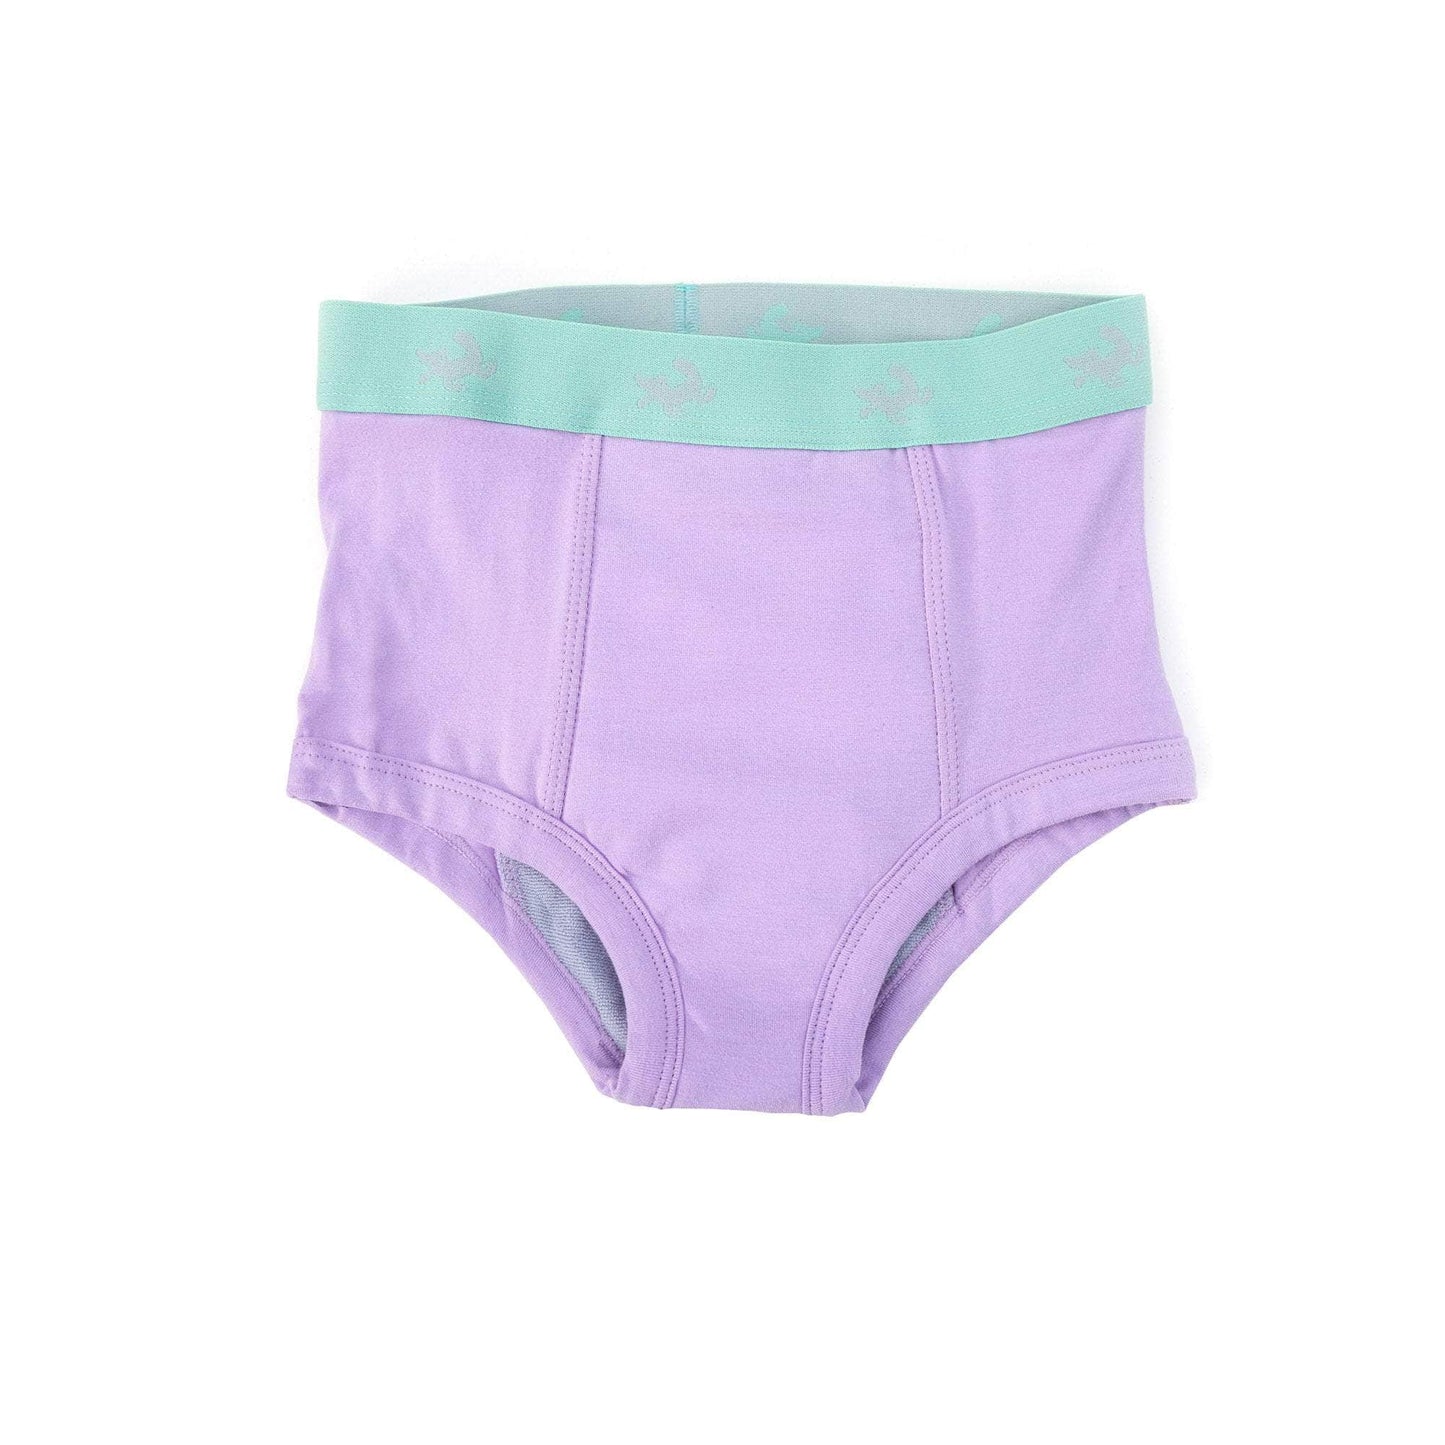 CONNI Kids Tackers 5801 Incontinence Underwear - Caring Clothing